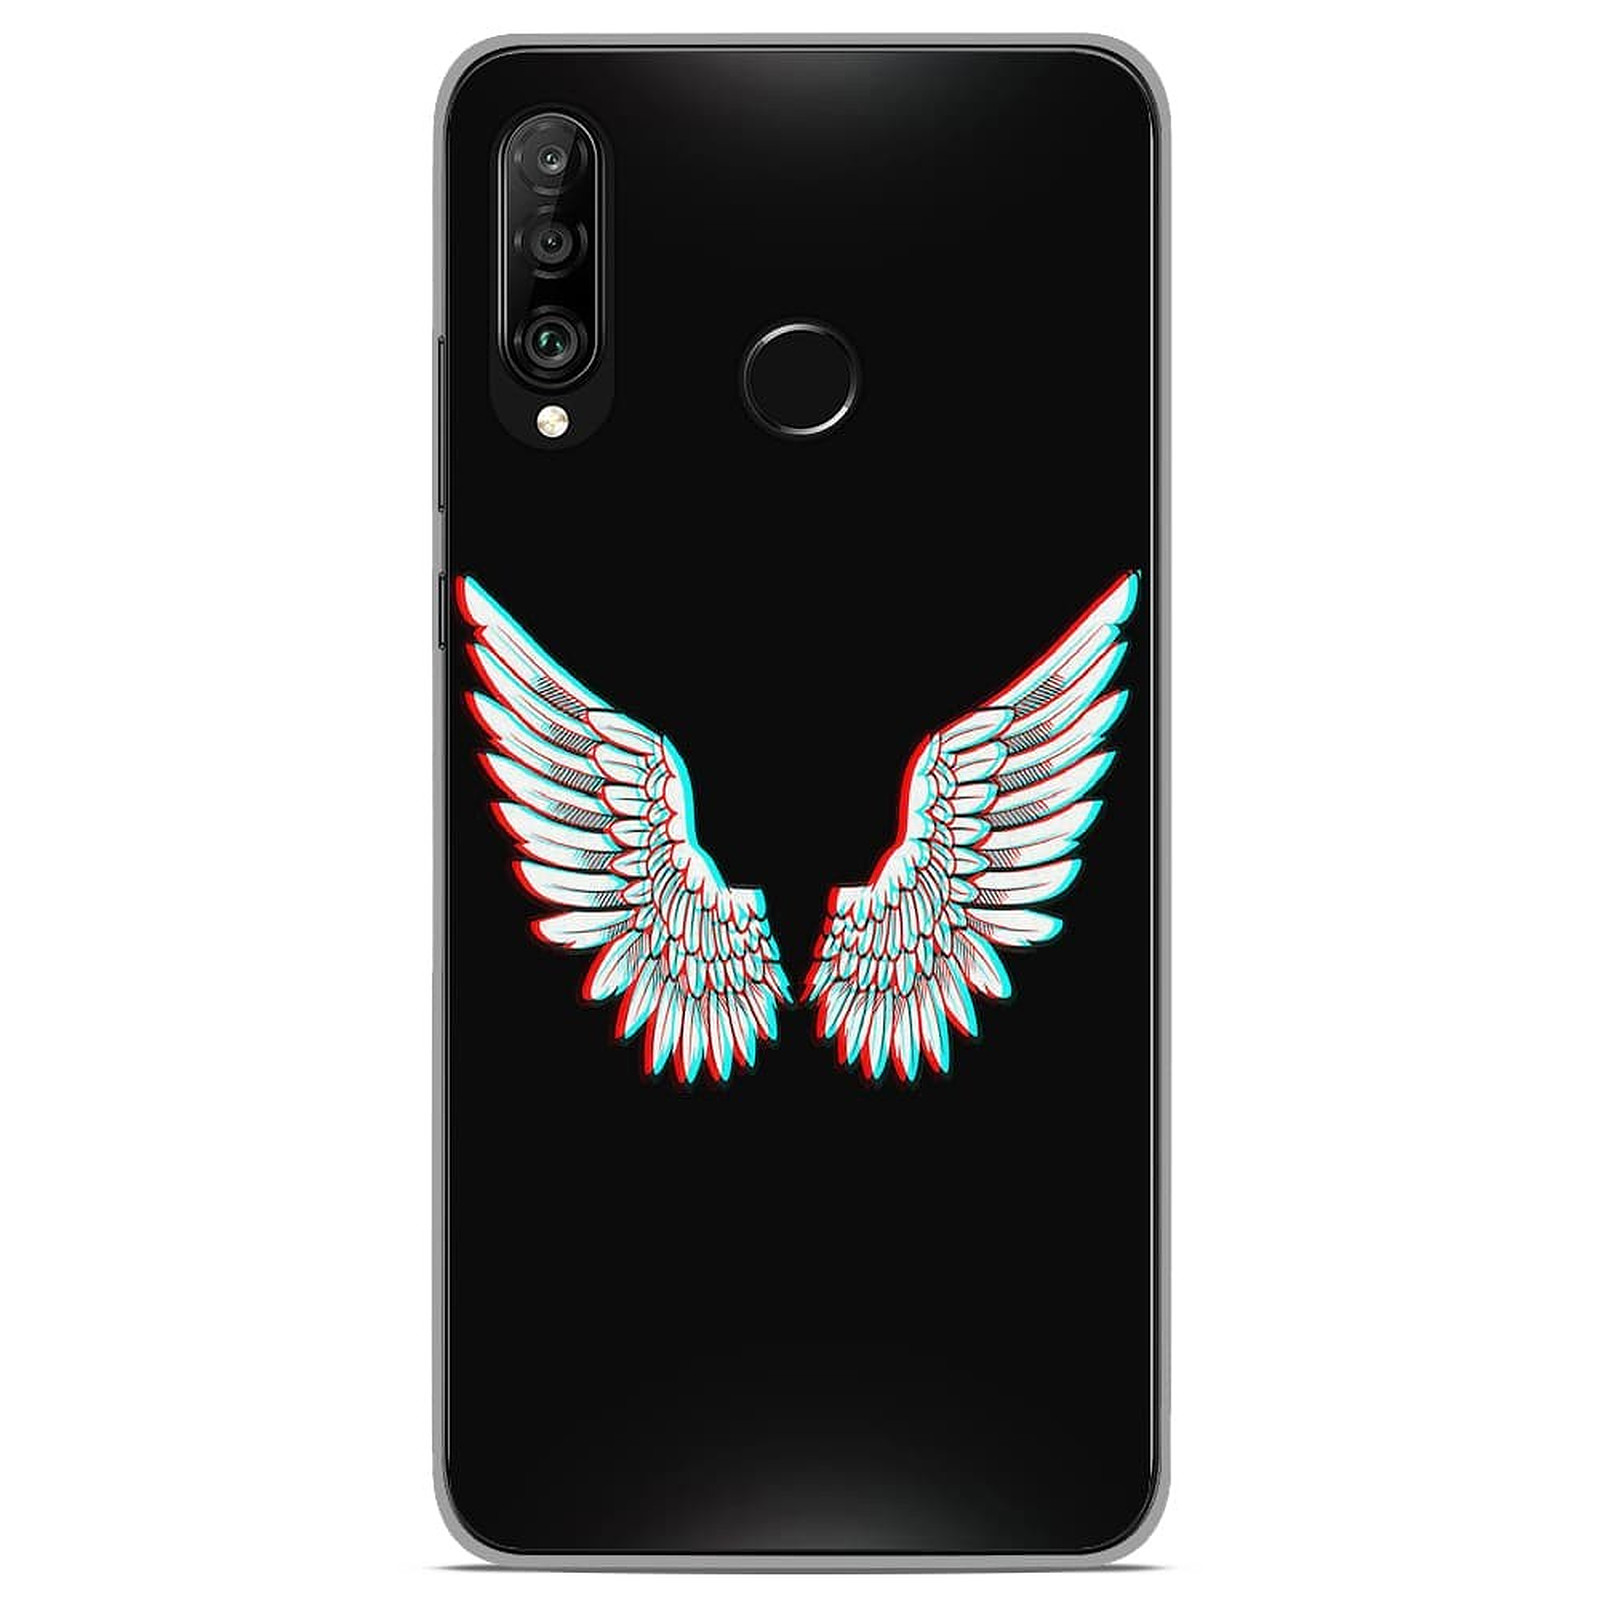 1001 Coques Coque silicone gel Huawei P30 Lite motif Ailes d'Ange - Coque telephone 1001Coques